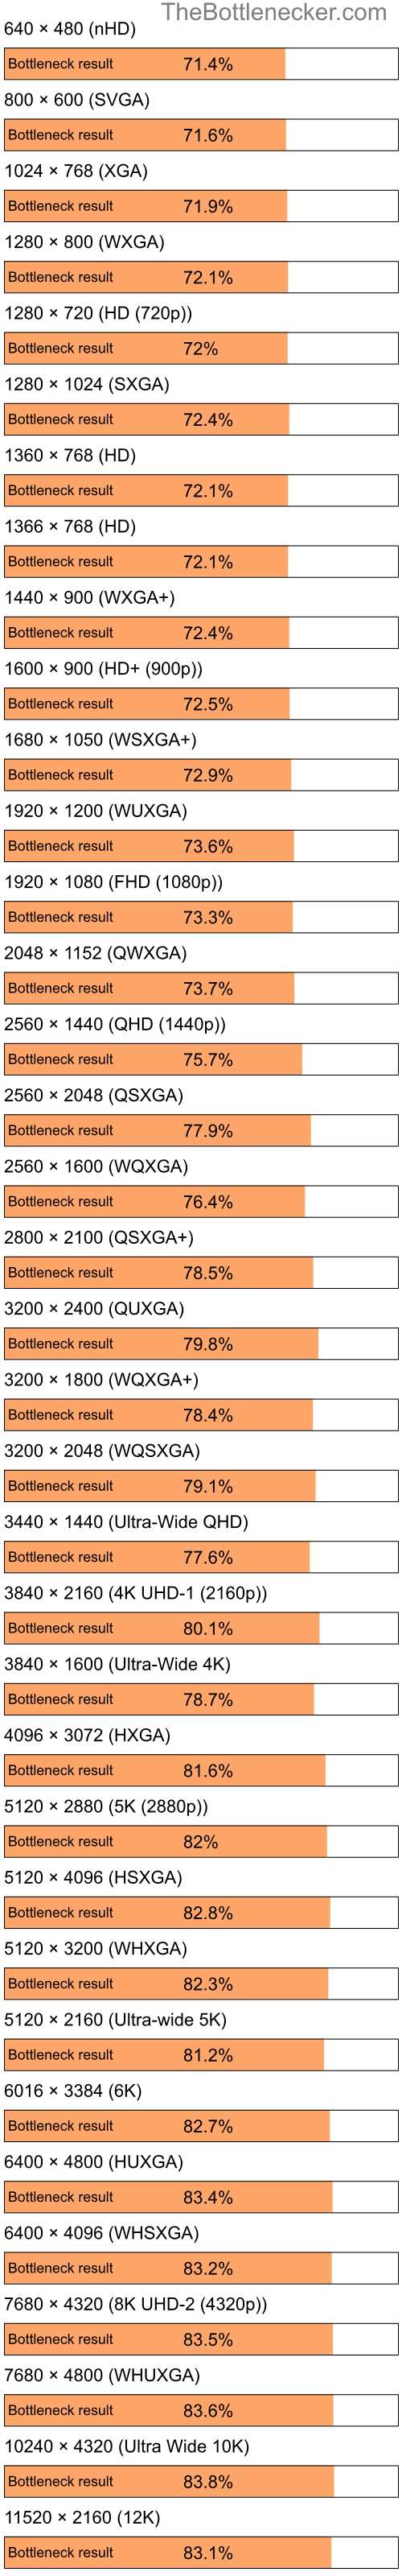 Bottleneck results by resolution for Intel Pentium 4 and AMD Radeon X800 PRO in Graphic Card Intense Tasks